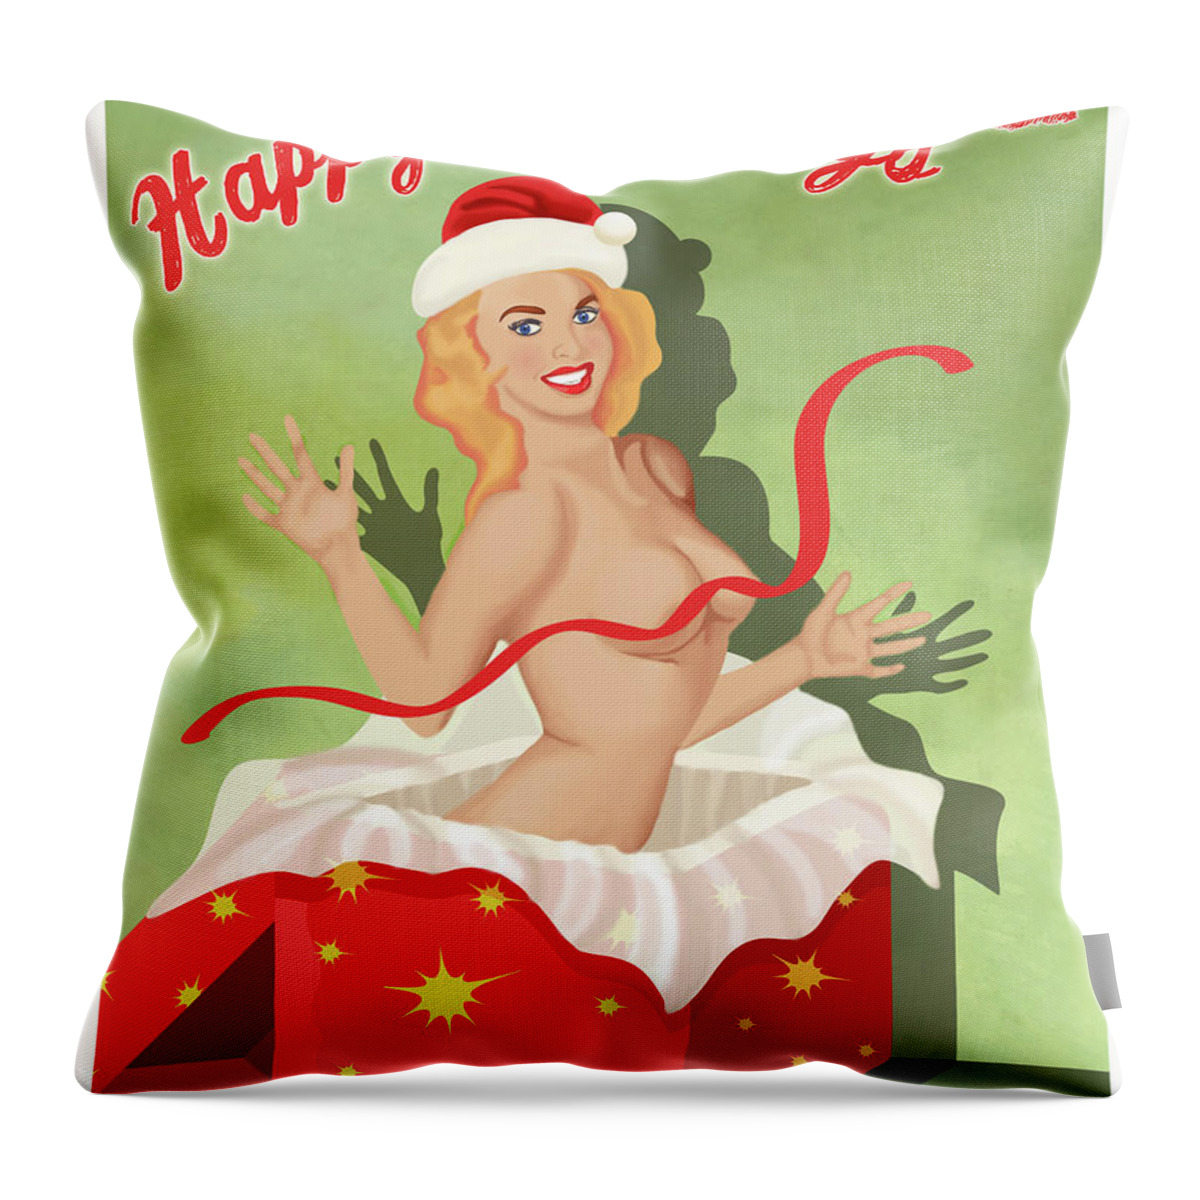 Pin-up Throw Pillow featuring the digital art Pin-up Surprise by Long Shot